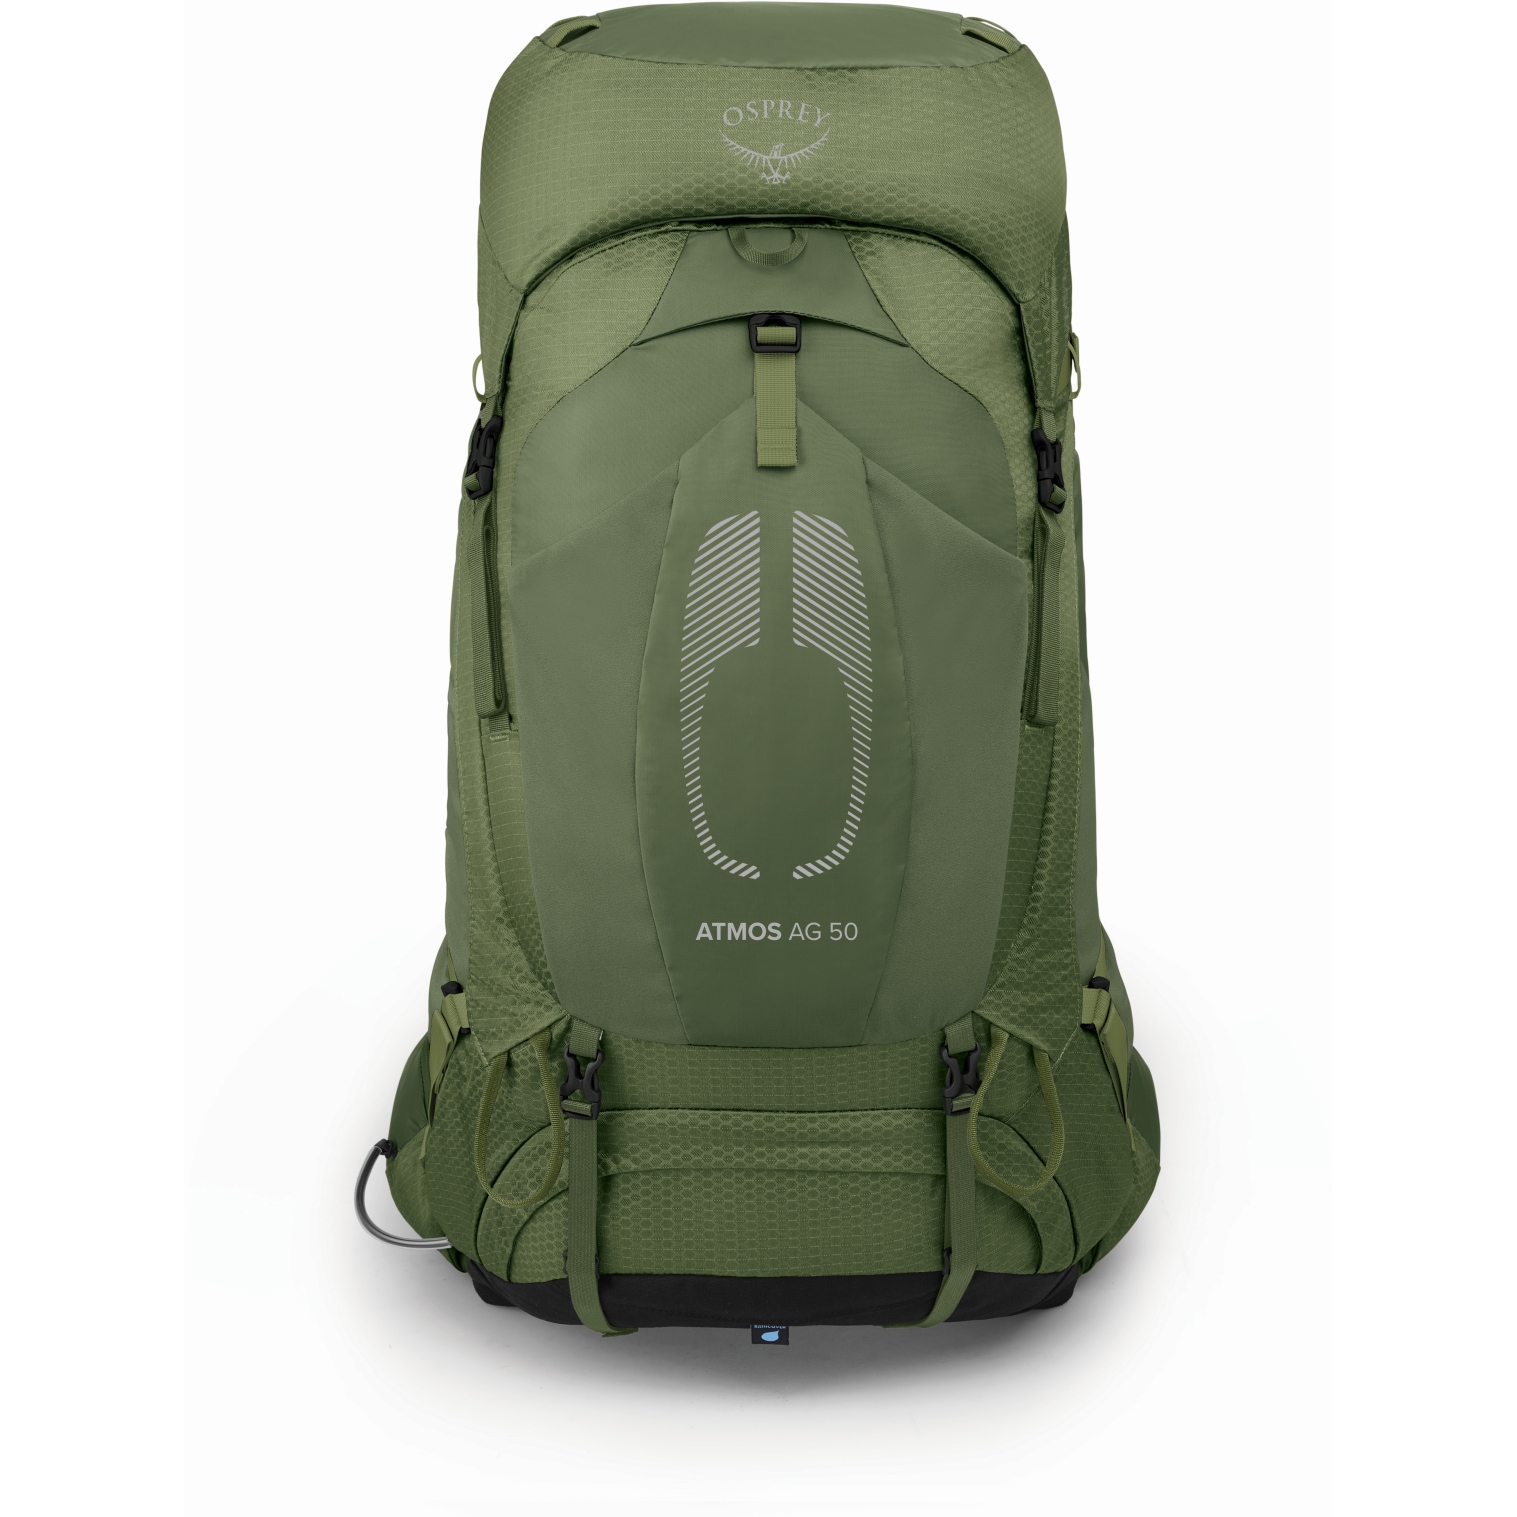 Image of Osprey Atmos AG 50 Backpack - Mythical Green - S/M